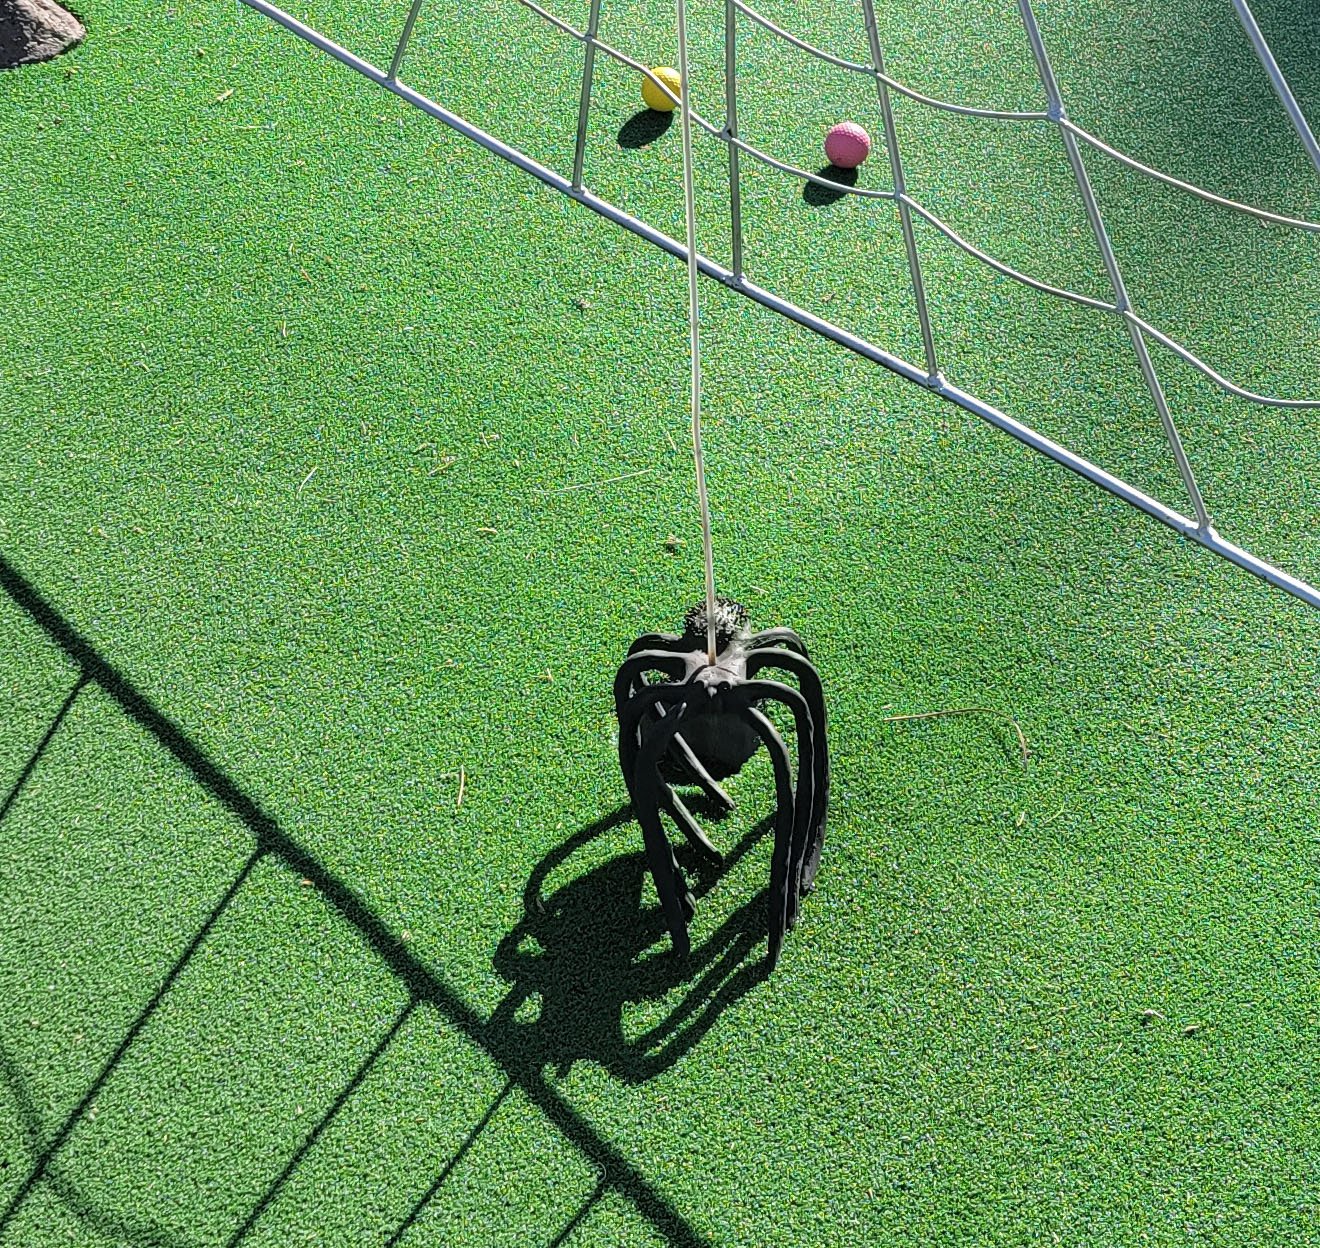 My one shining moment where the little animatronic spider pushed my ball into the hole. Highlight of my trip.